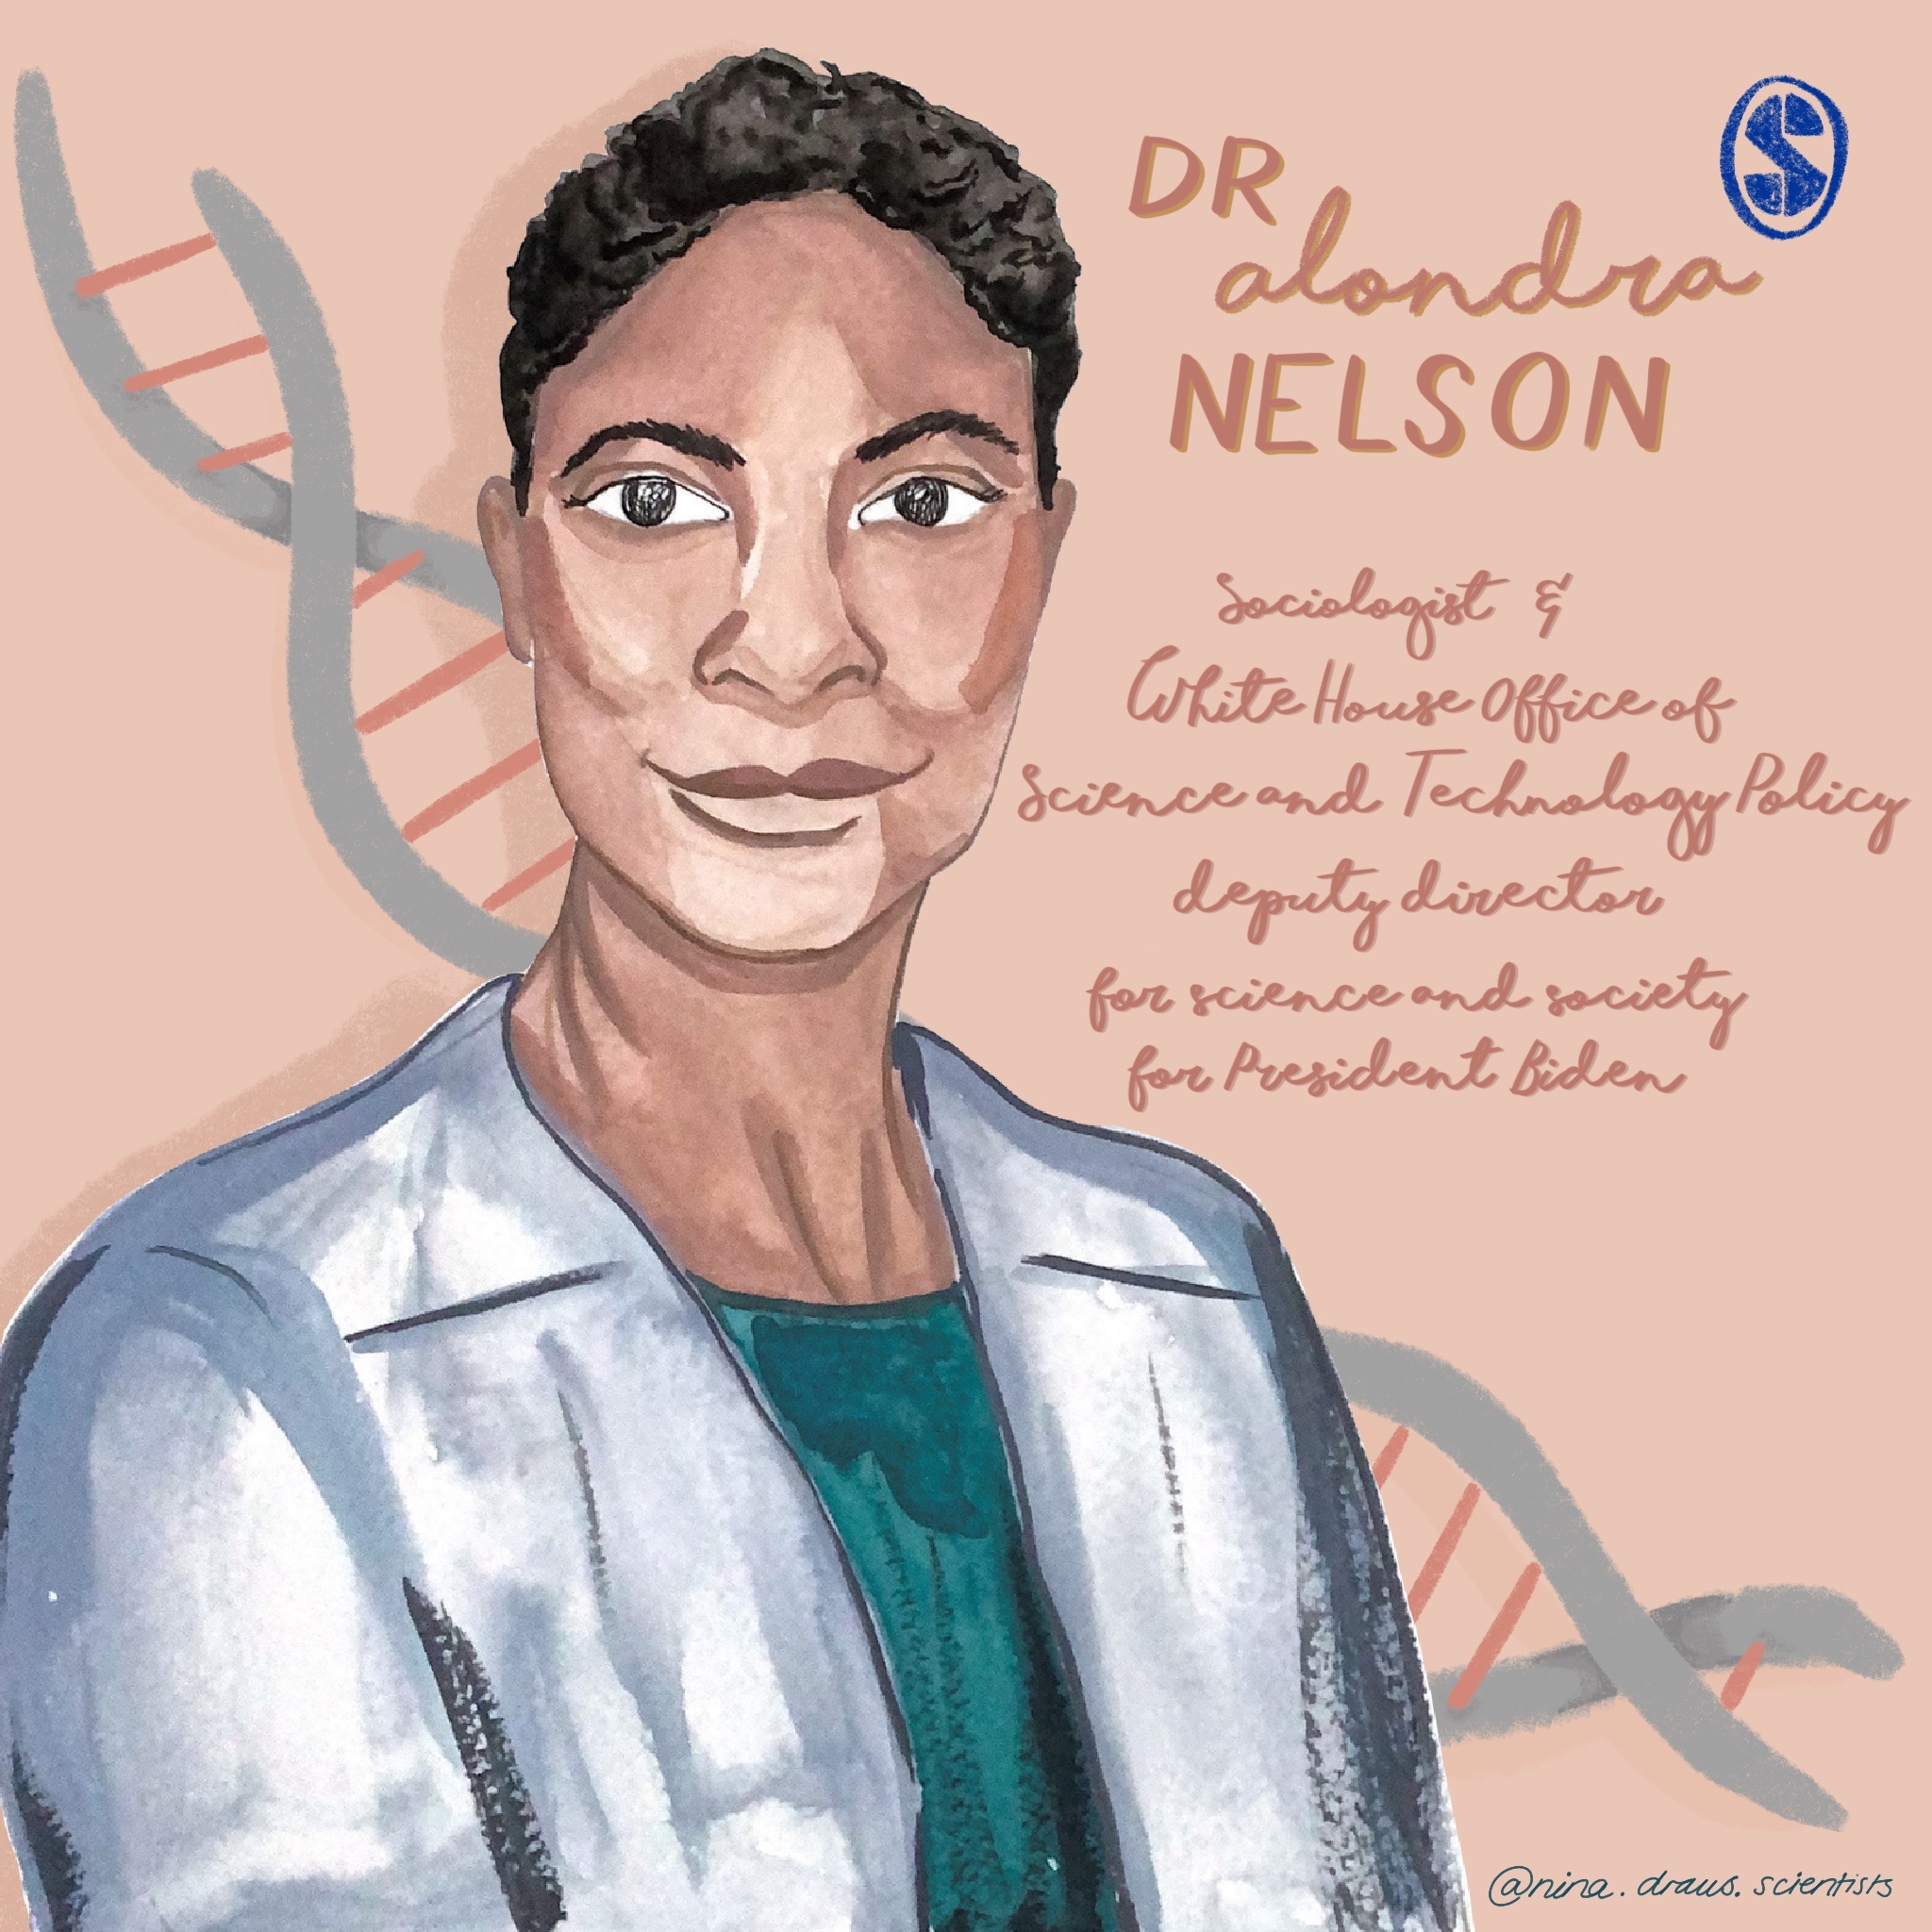 Asking Questions, Analyzing Outcomes: Alondra Nelson and the Betterment of Society